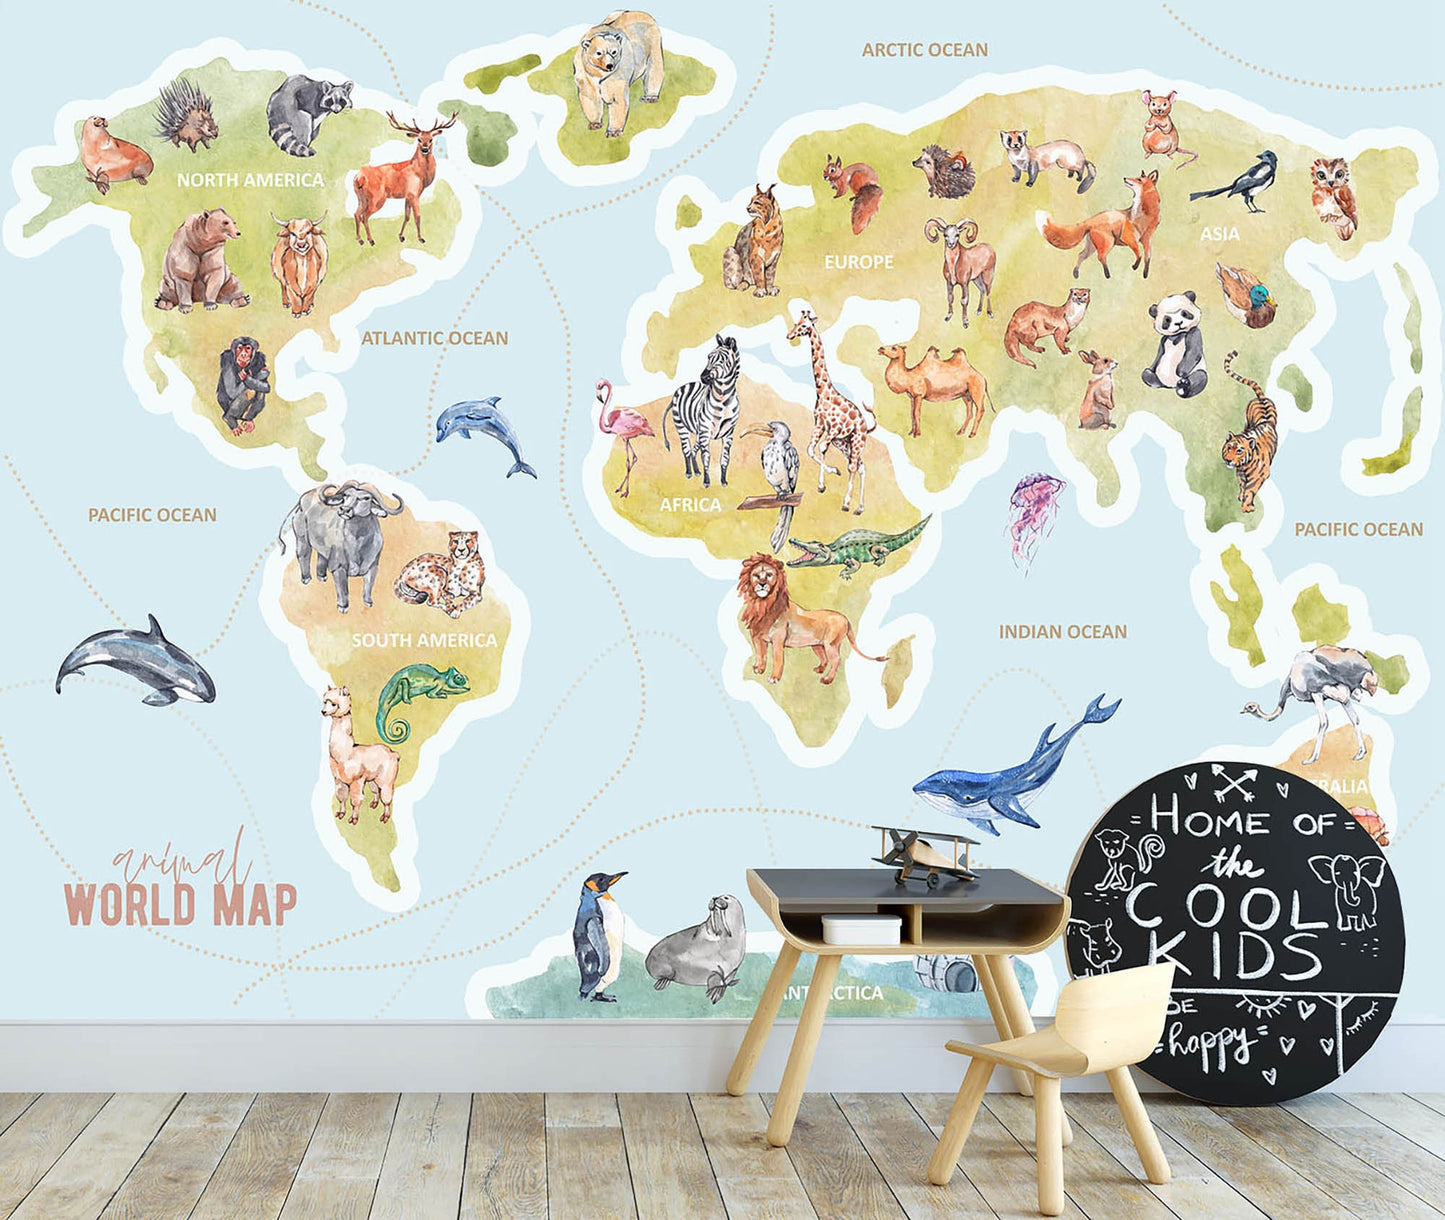 Educational World Map Peel and Stick Wall Mural - Famous Icons Animals and Continents - WM020